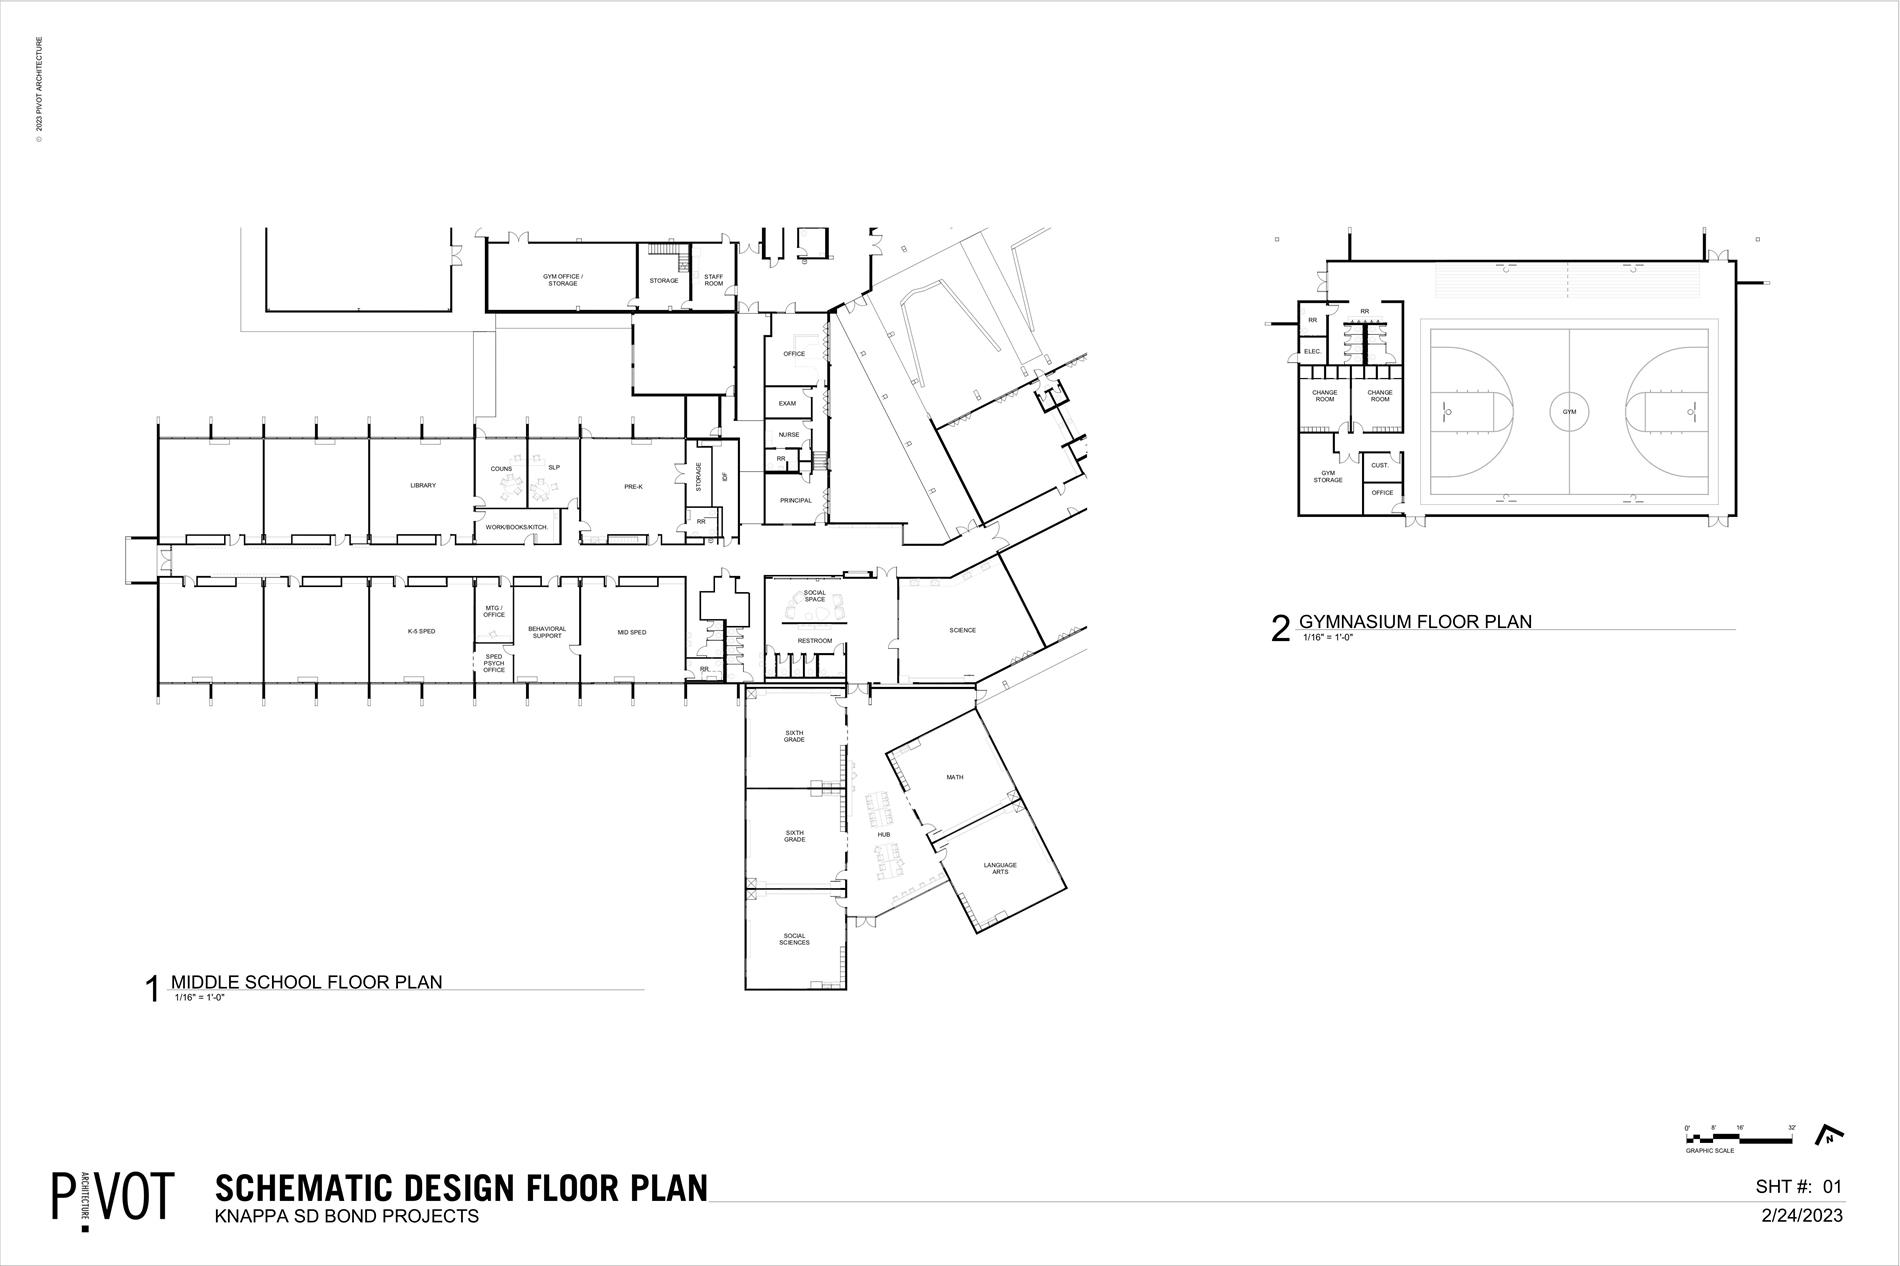 New floor plan draft schematic for the new Middle School wing and gym at Hilda Lahti Elementary